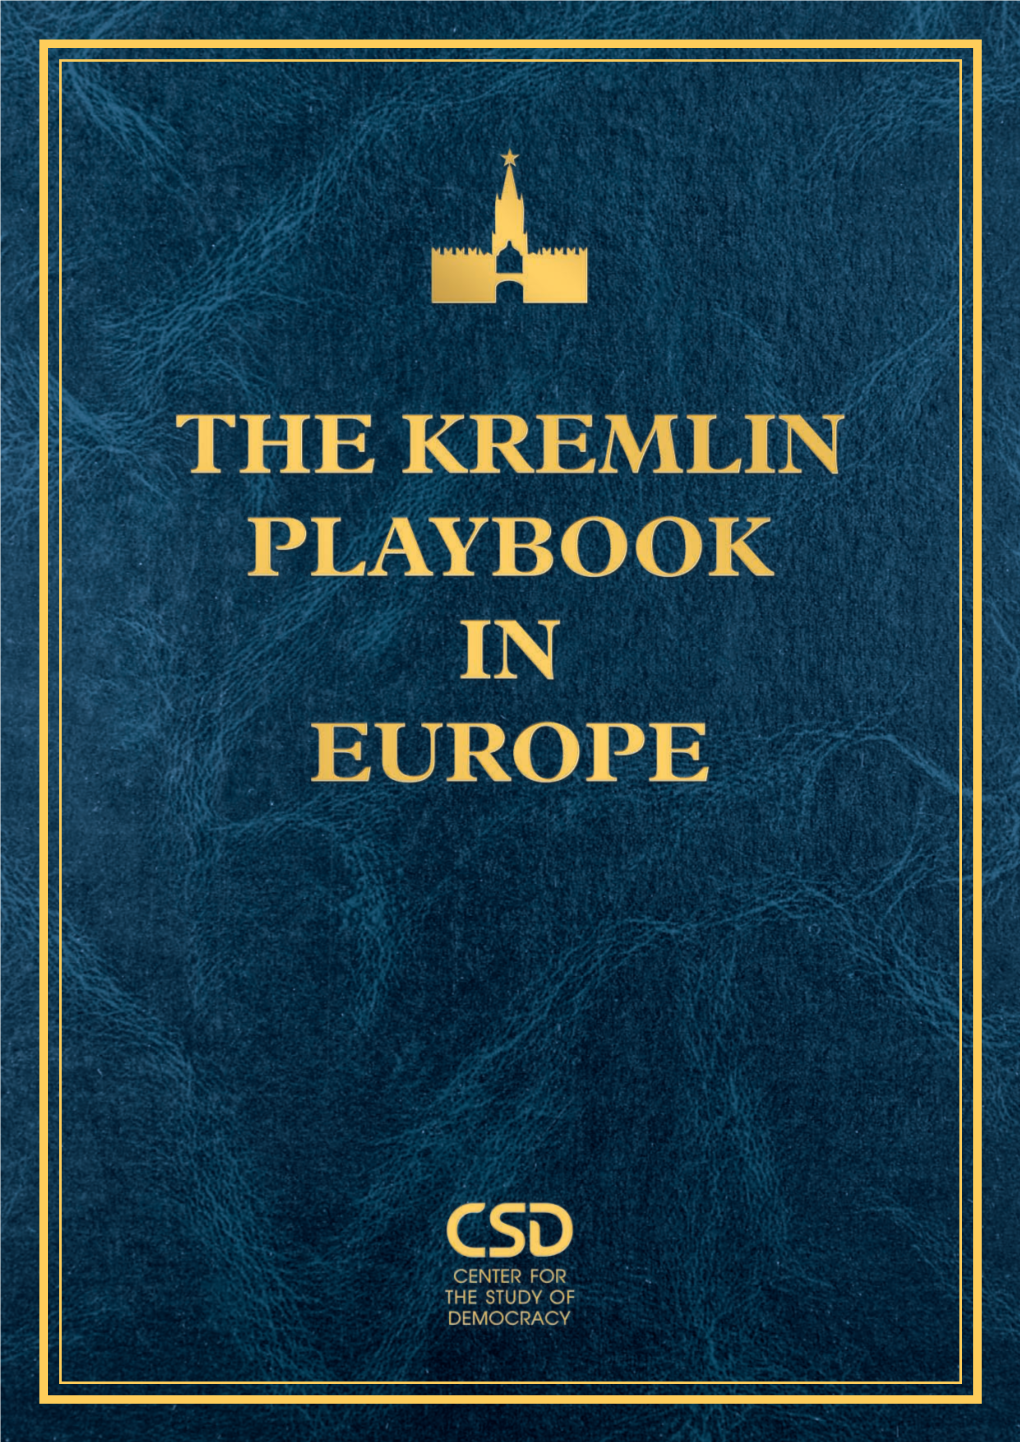 THE KREMLIN PLAYBOOK in EUROPE the Kremlin Playbook in Europe Analyzes the Tools and Methods Used by Russia to Exercise Its Influence on the Con- Tinent